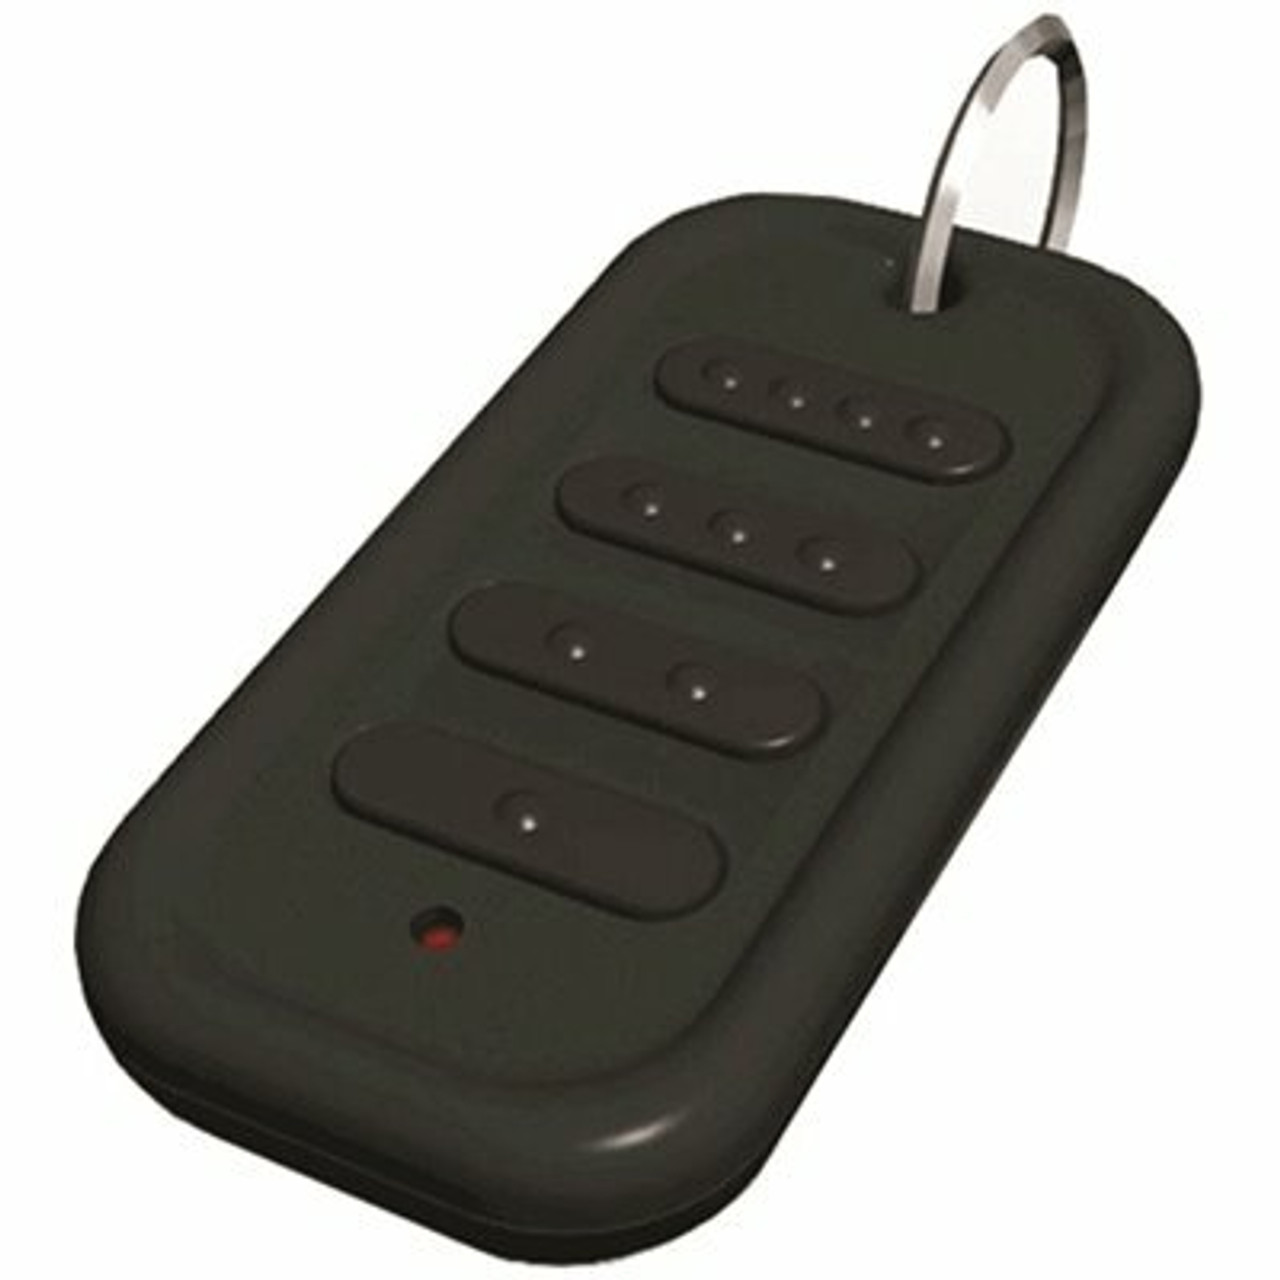 Lcn 3-Button Black Handheld Wireless Transmitter For Use With Automatic Dors (Power Operators)